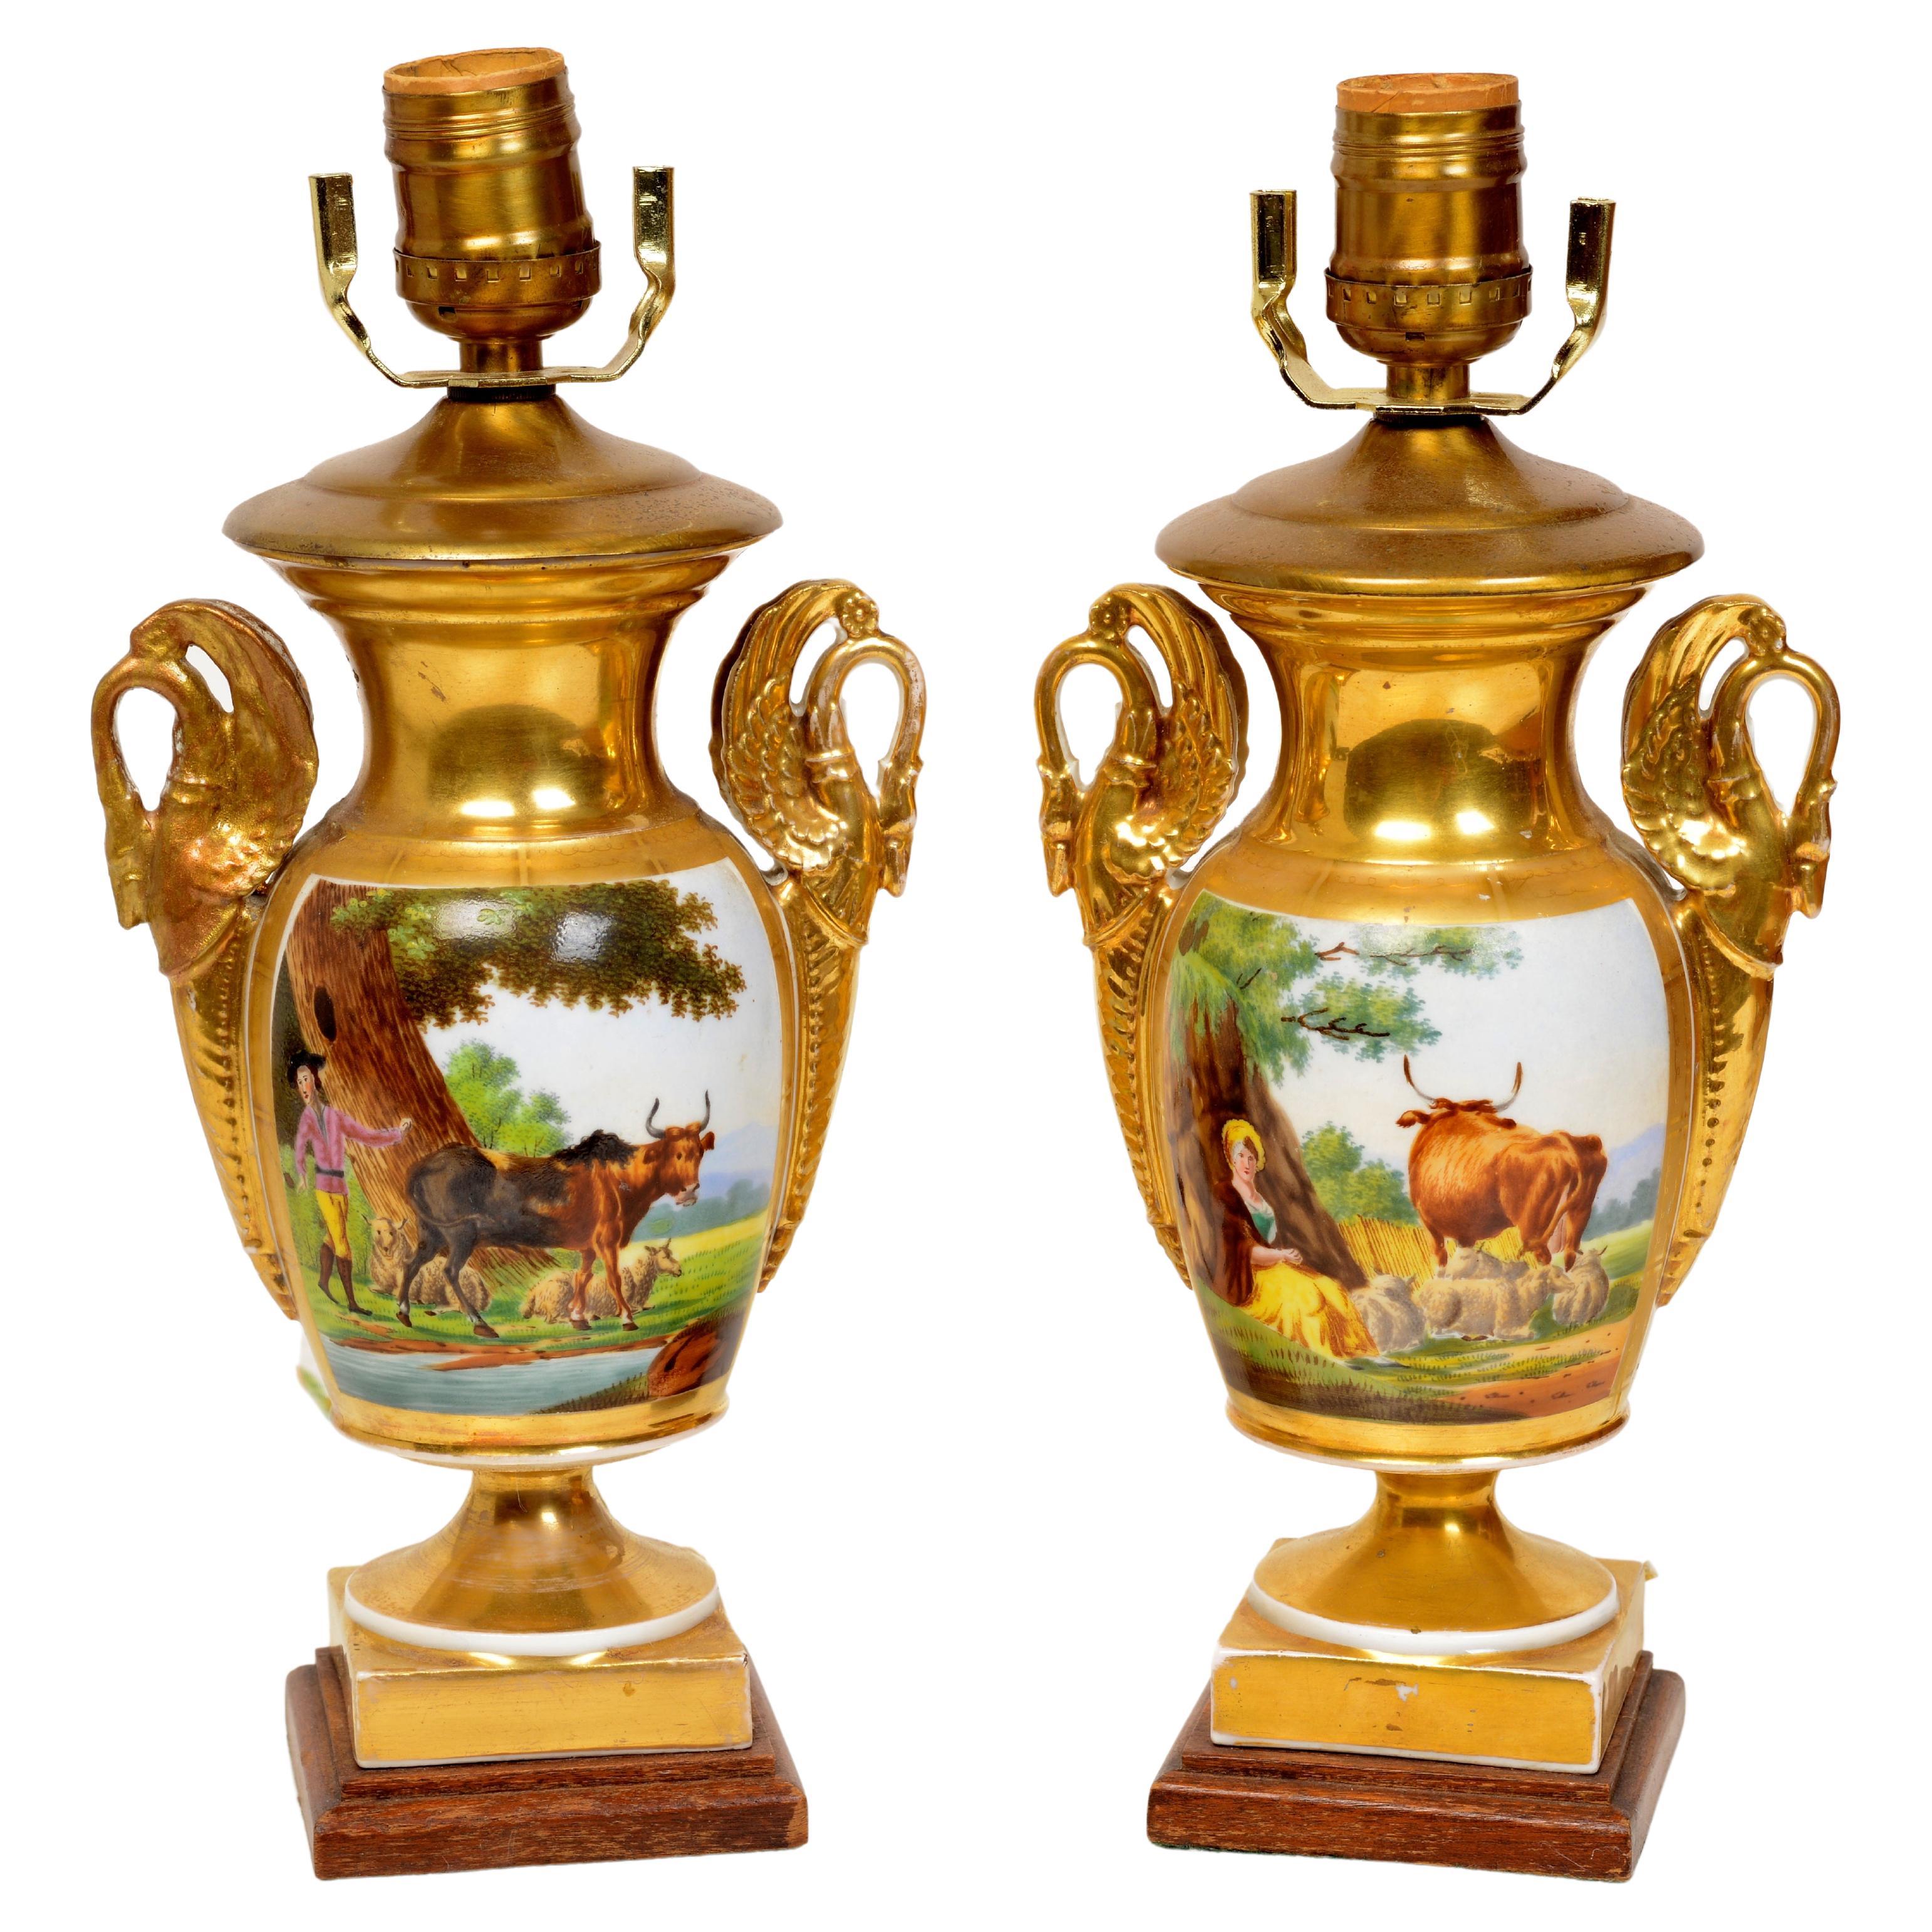 Pr of French Old Paris or Vieux Paris Urns Now Converted into Table Lamps, C1810 For Sale